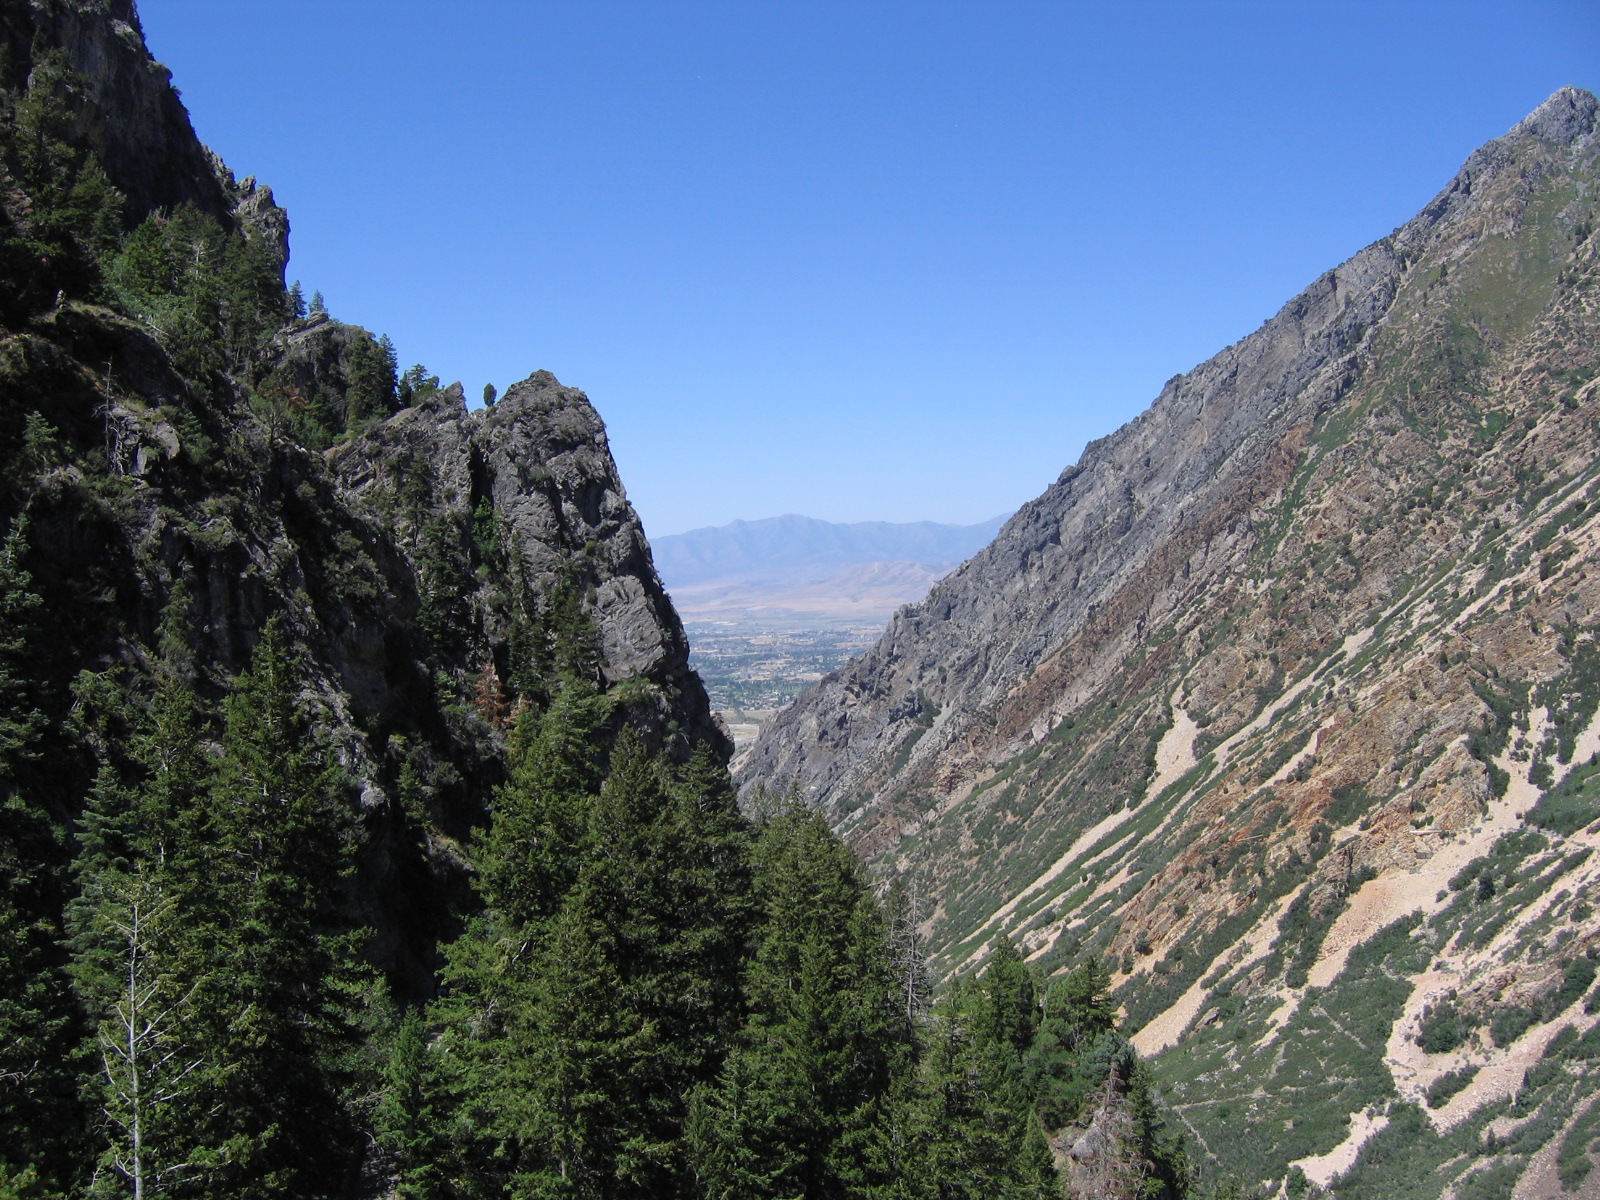 Utah Valley beyond the steep cliffs and fir trees of American Fork Canyon